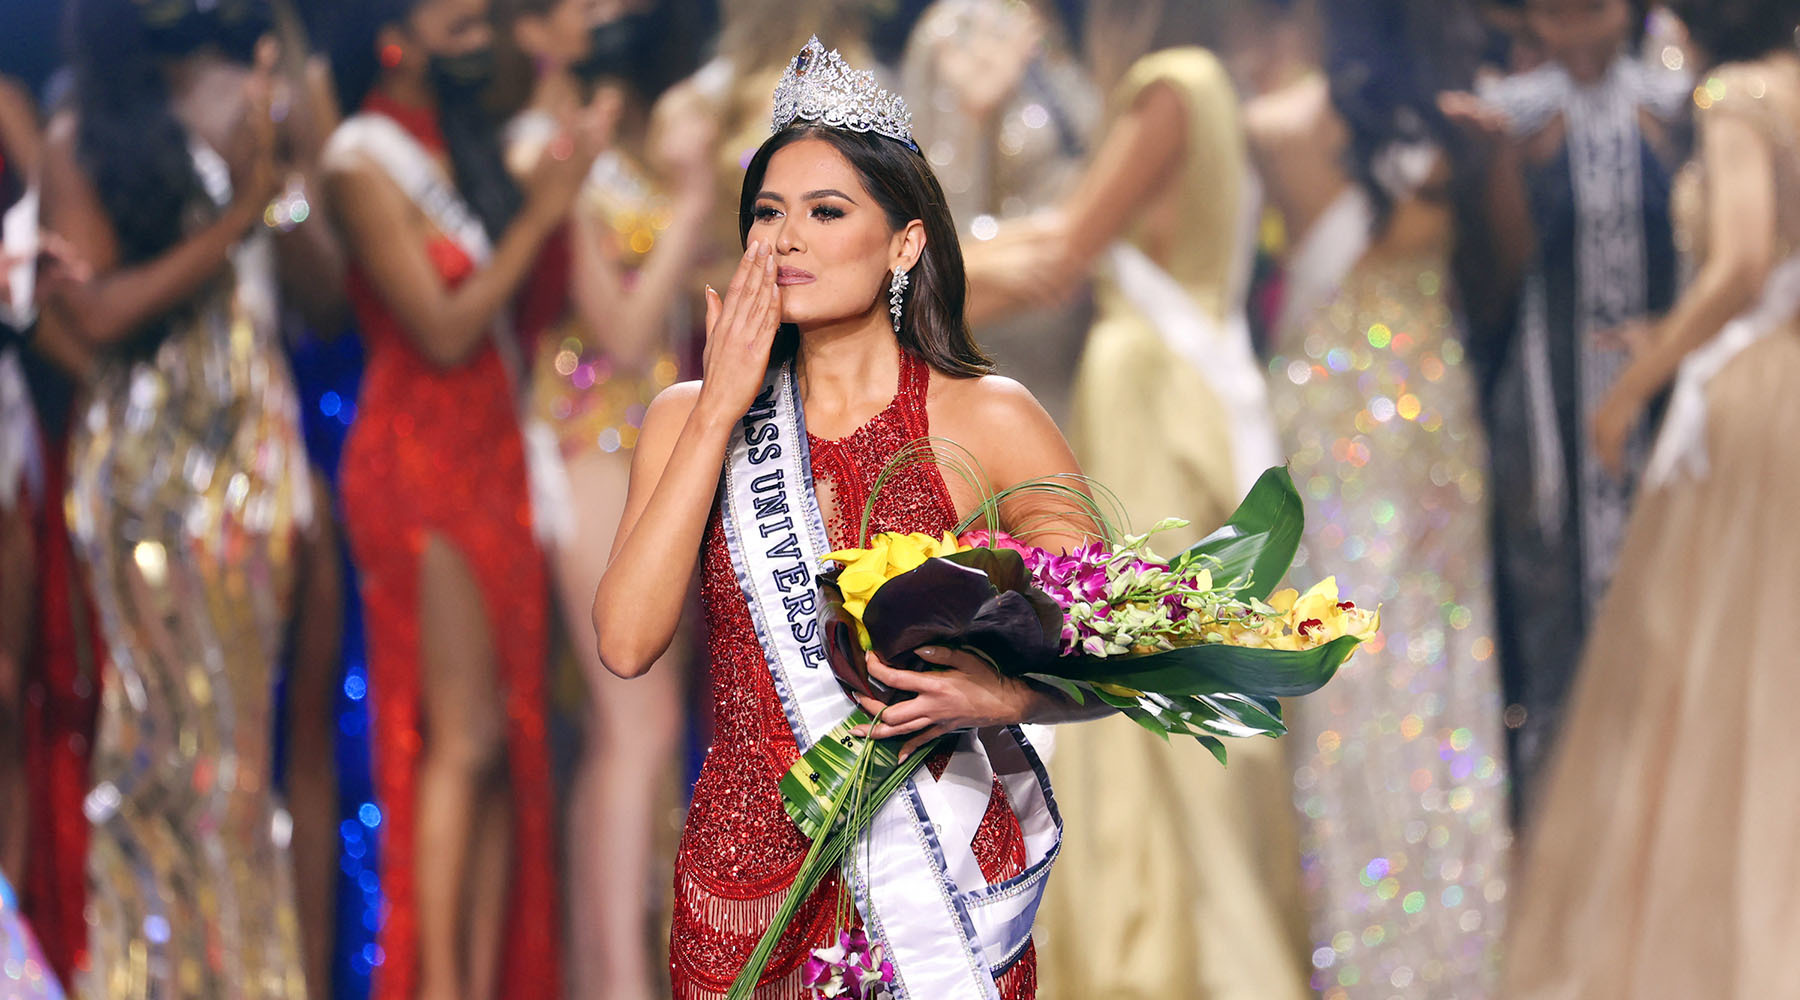 The Representative Of Mexico Wins The Miss Universe Pageant Teller Report 1480